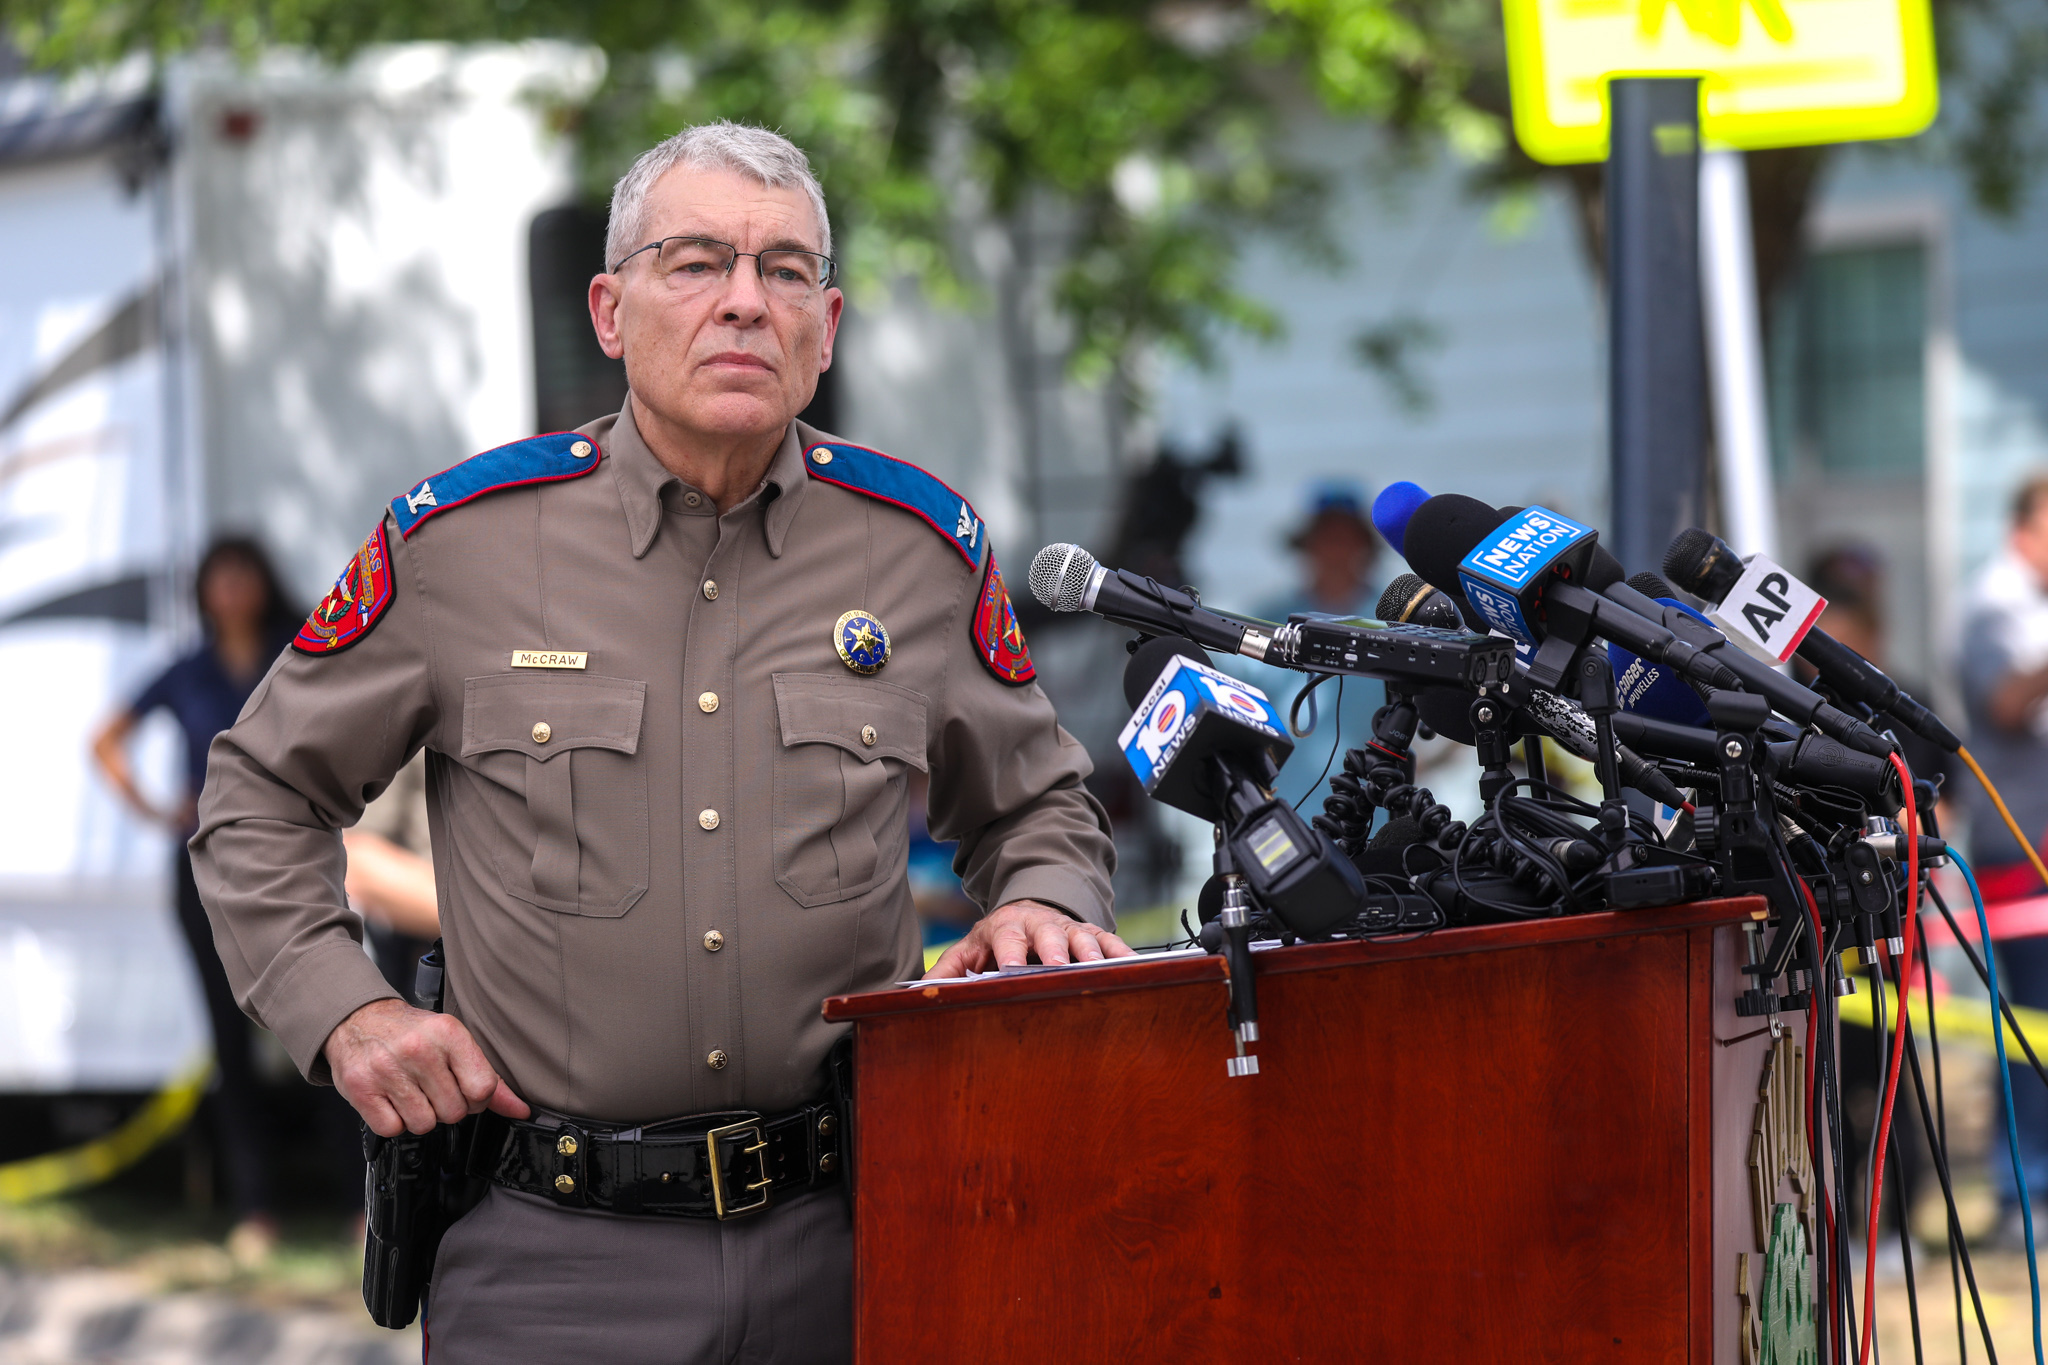 PHOTO: Col. Steven C. McCraw, Director of the Texas Department of Public Safety, speaks during a press conference about the mass shooting at Robb Elementary School on May 27, 2022, in Uvalde, Texas.